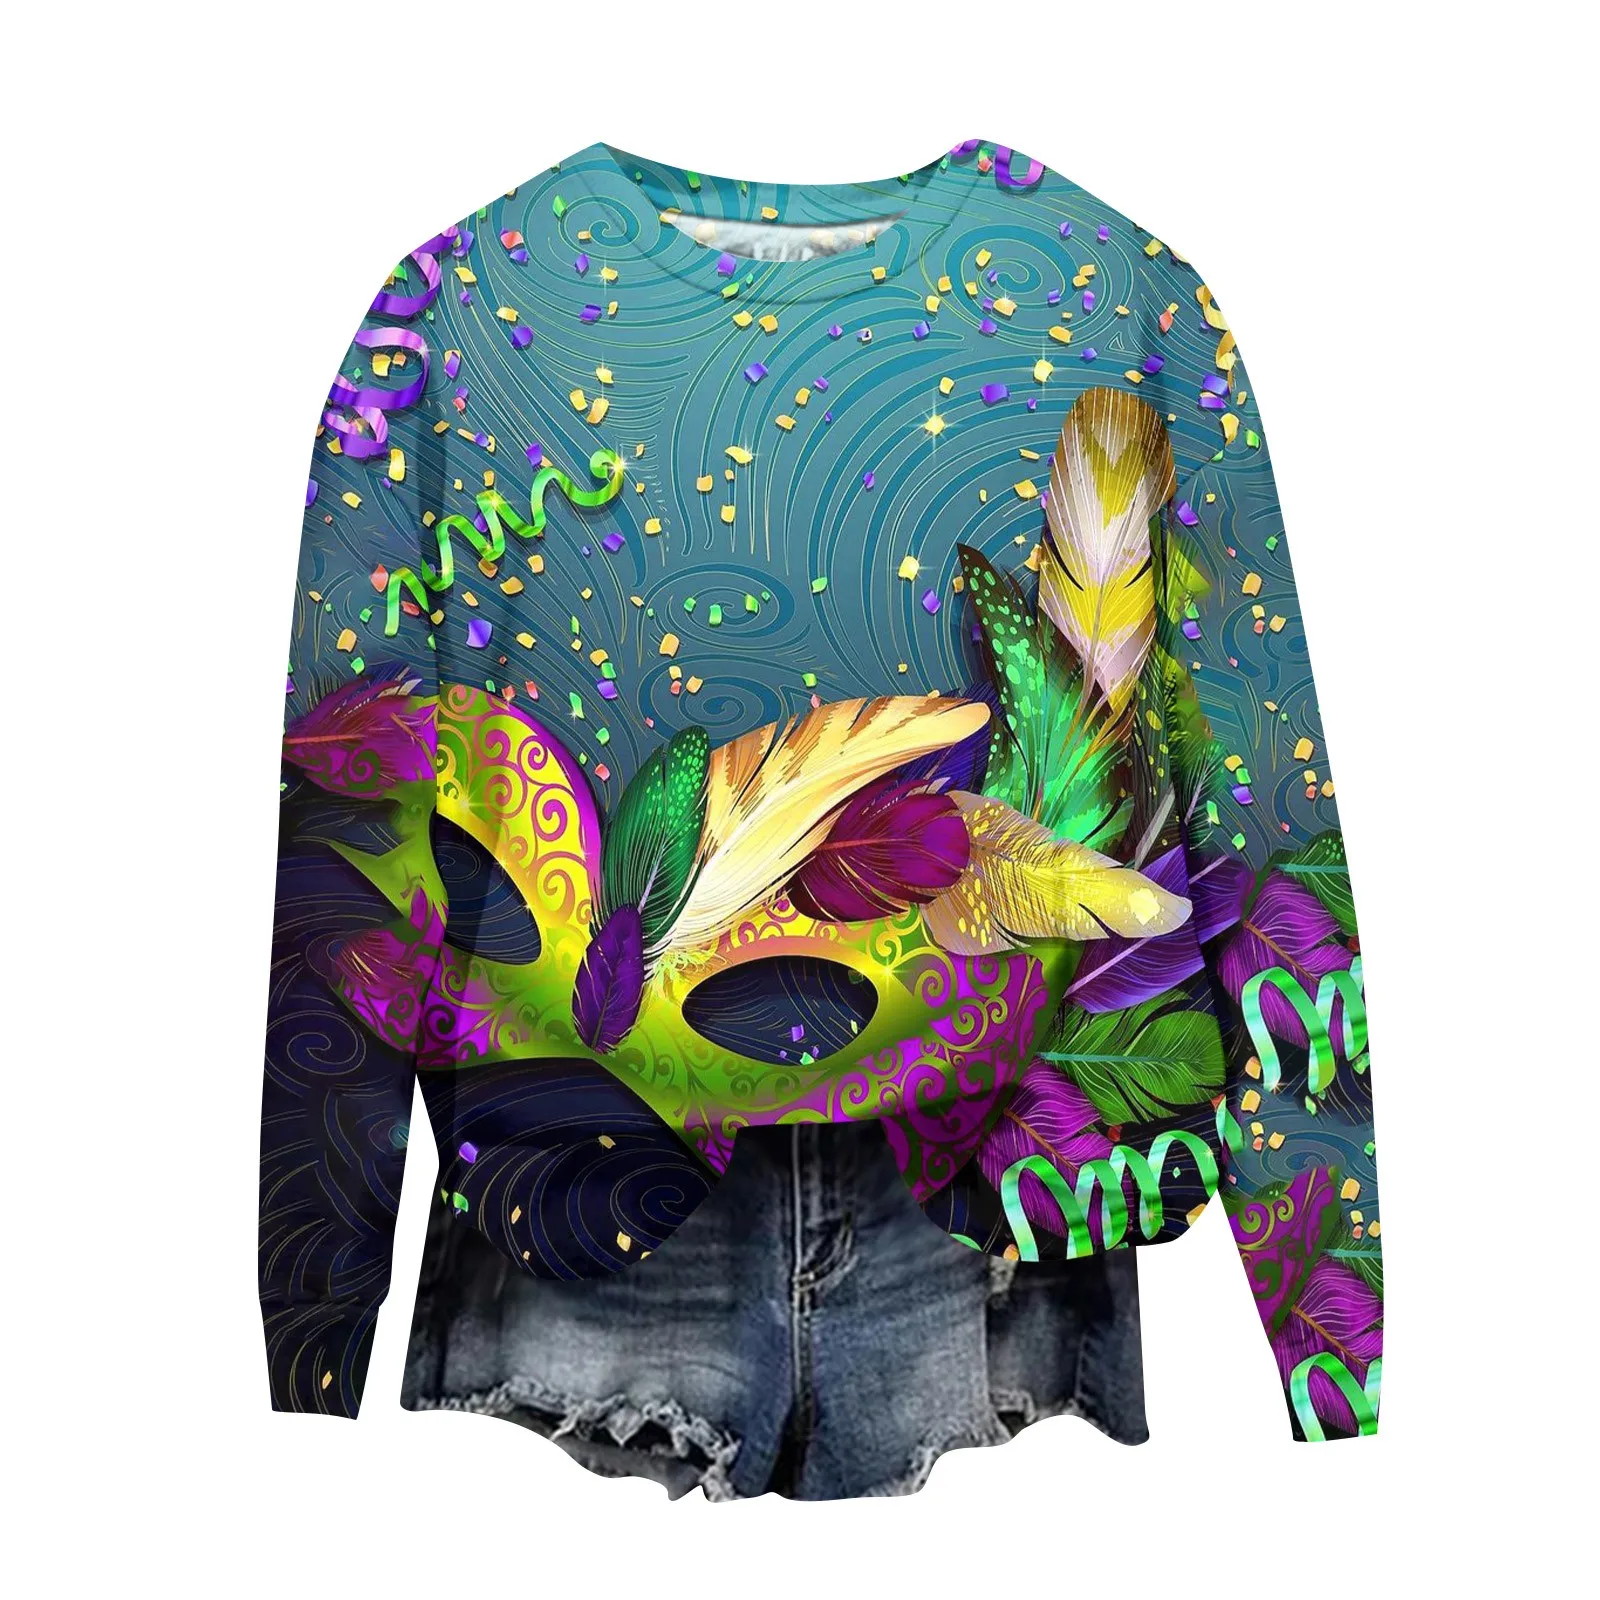 

Women'S Casual Fashion Christmas Printing Long Sleeve O-Neck Pullover Top Blouse блузка женская Woman Blouses 한국인 리뷰 많은 옷